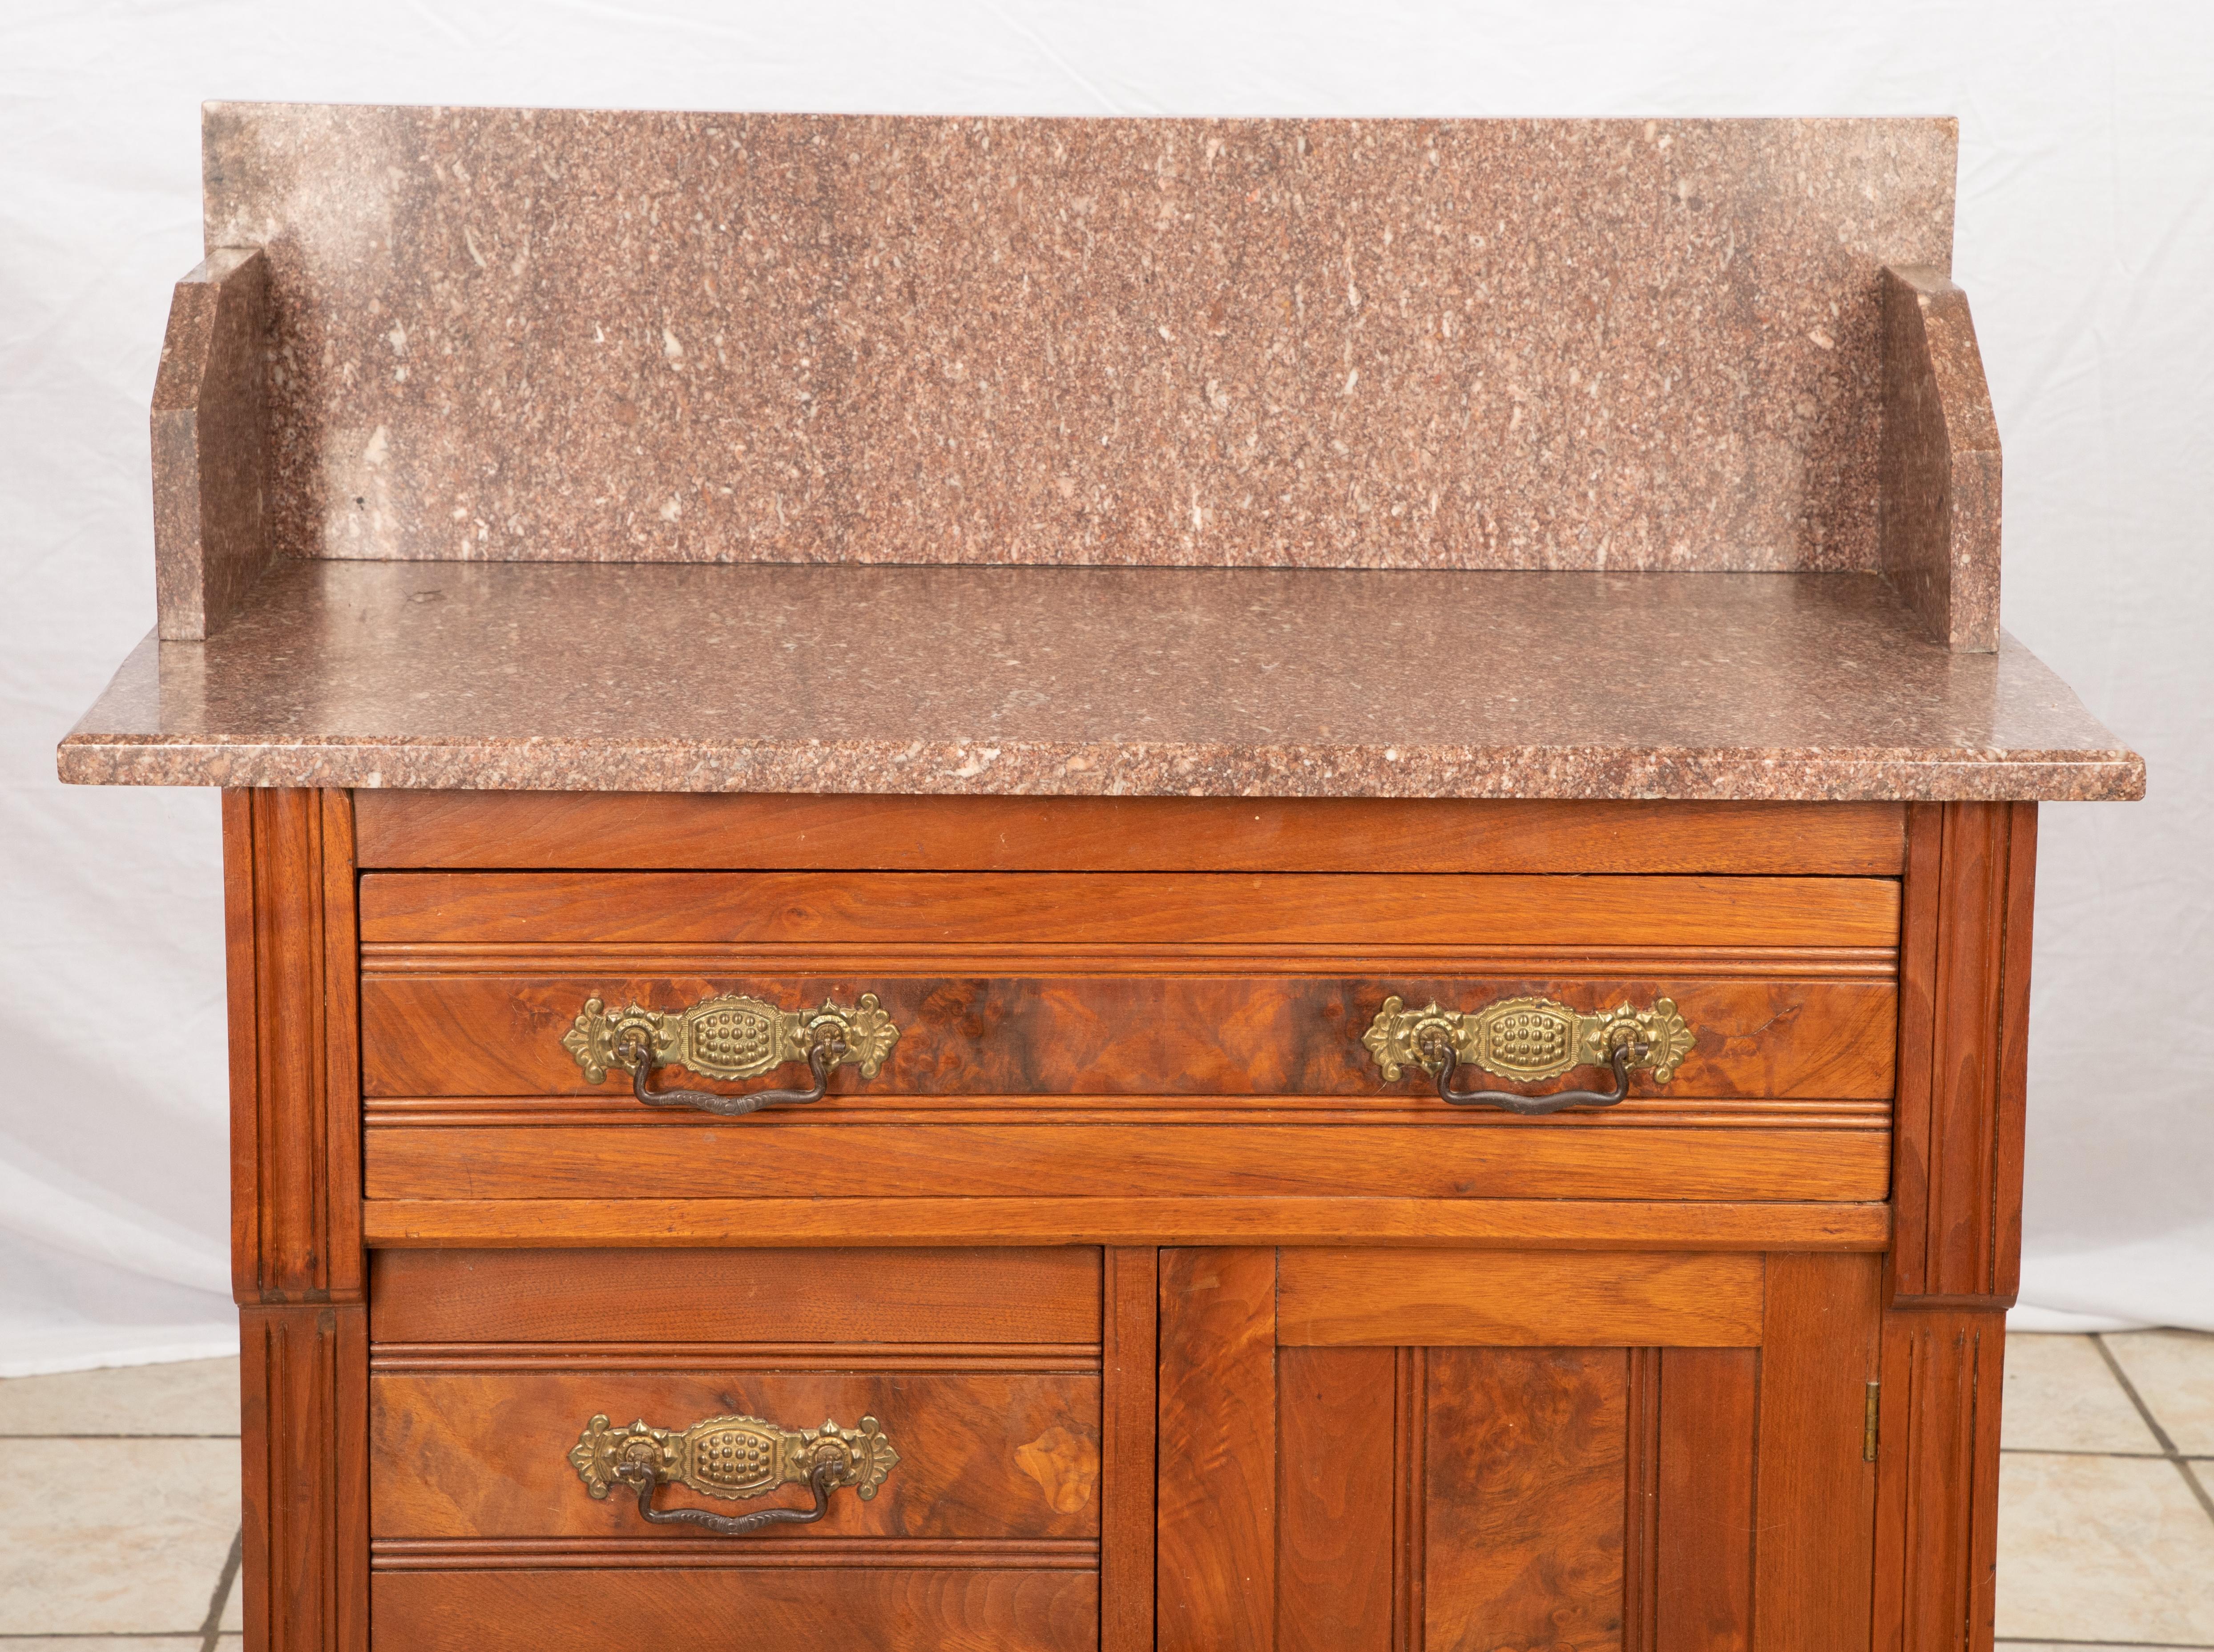 Offering this beautiful Eastlake marble-top wash stand. The wash stand is in a warm cherrywood and burled wood that is stained to a warm tone. The marble-top is a blush colored marble and has the high back. Has on long drawer over two smaller